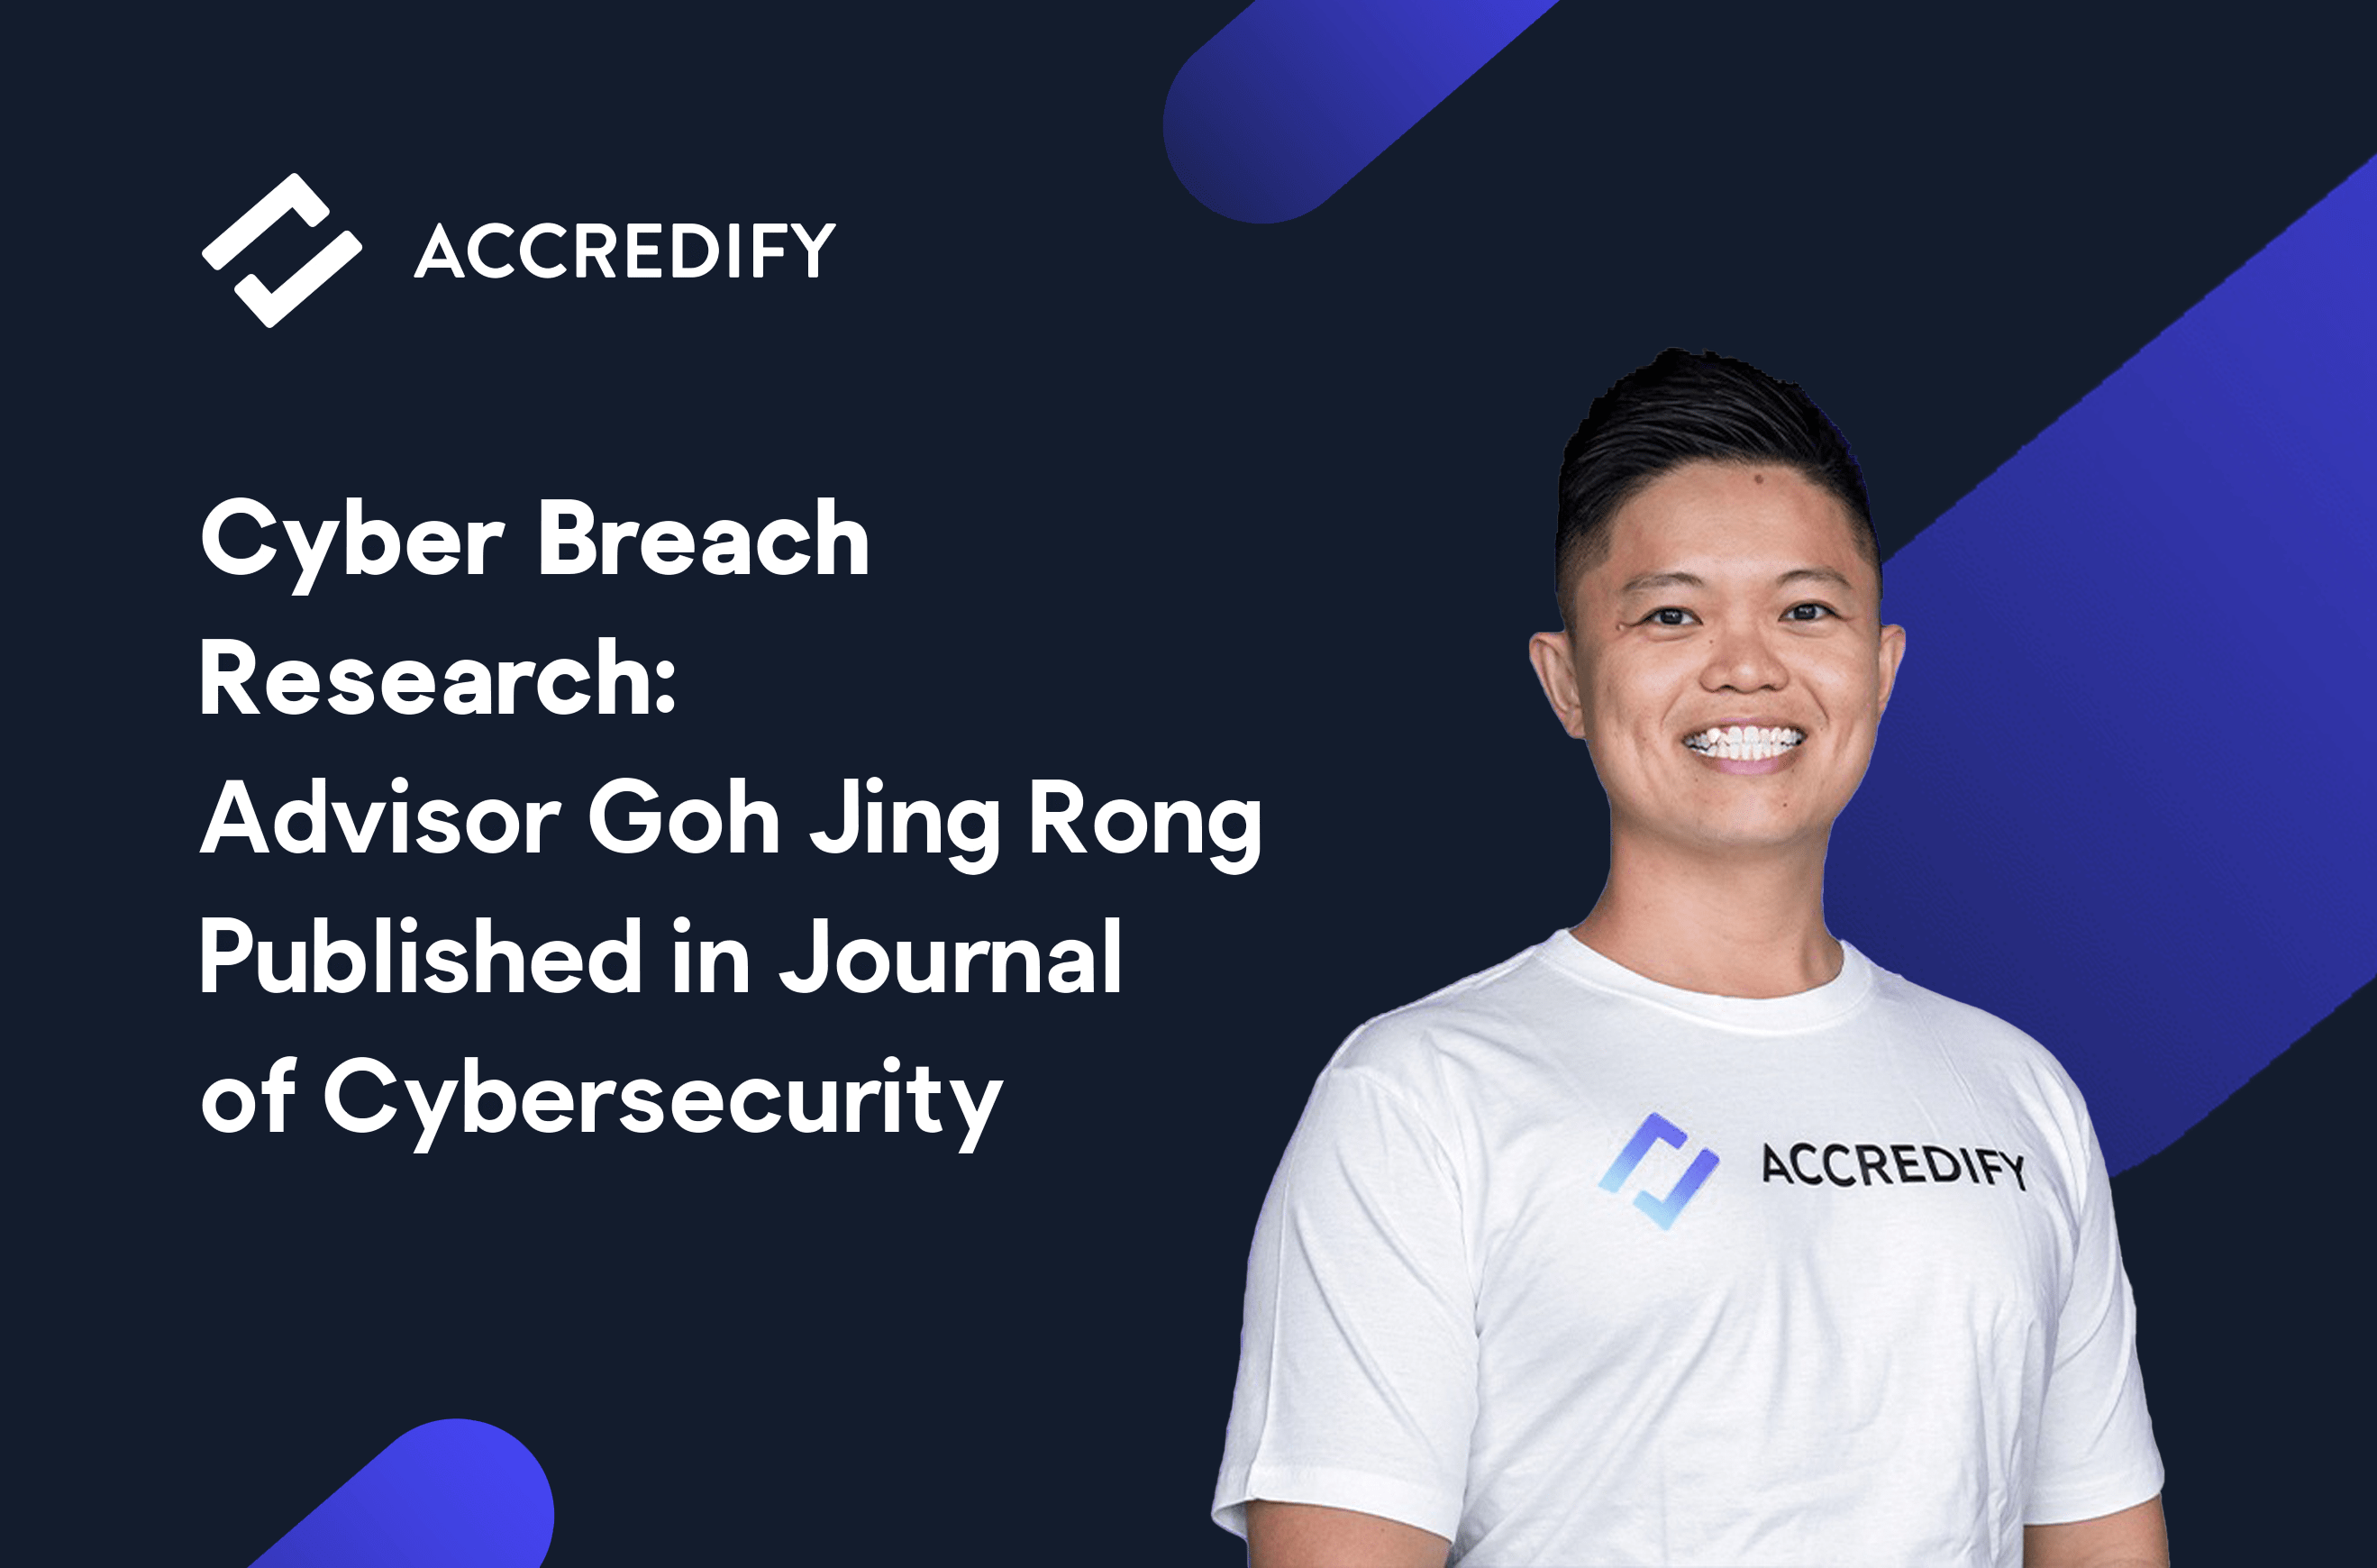 Cyber Breach Research: Advisor Goh Jing Rong Published in Journal of Cybersecurity​